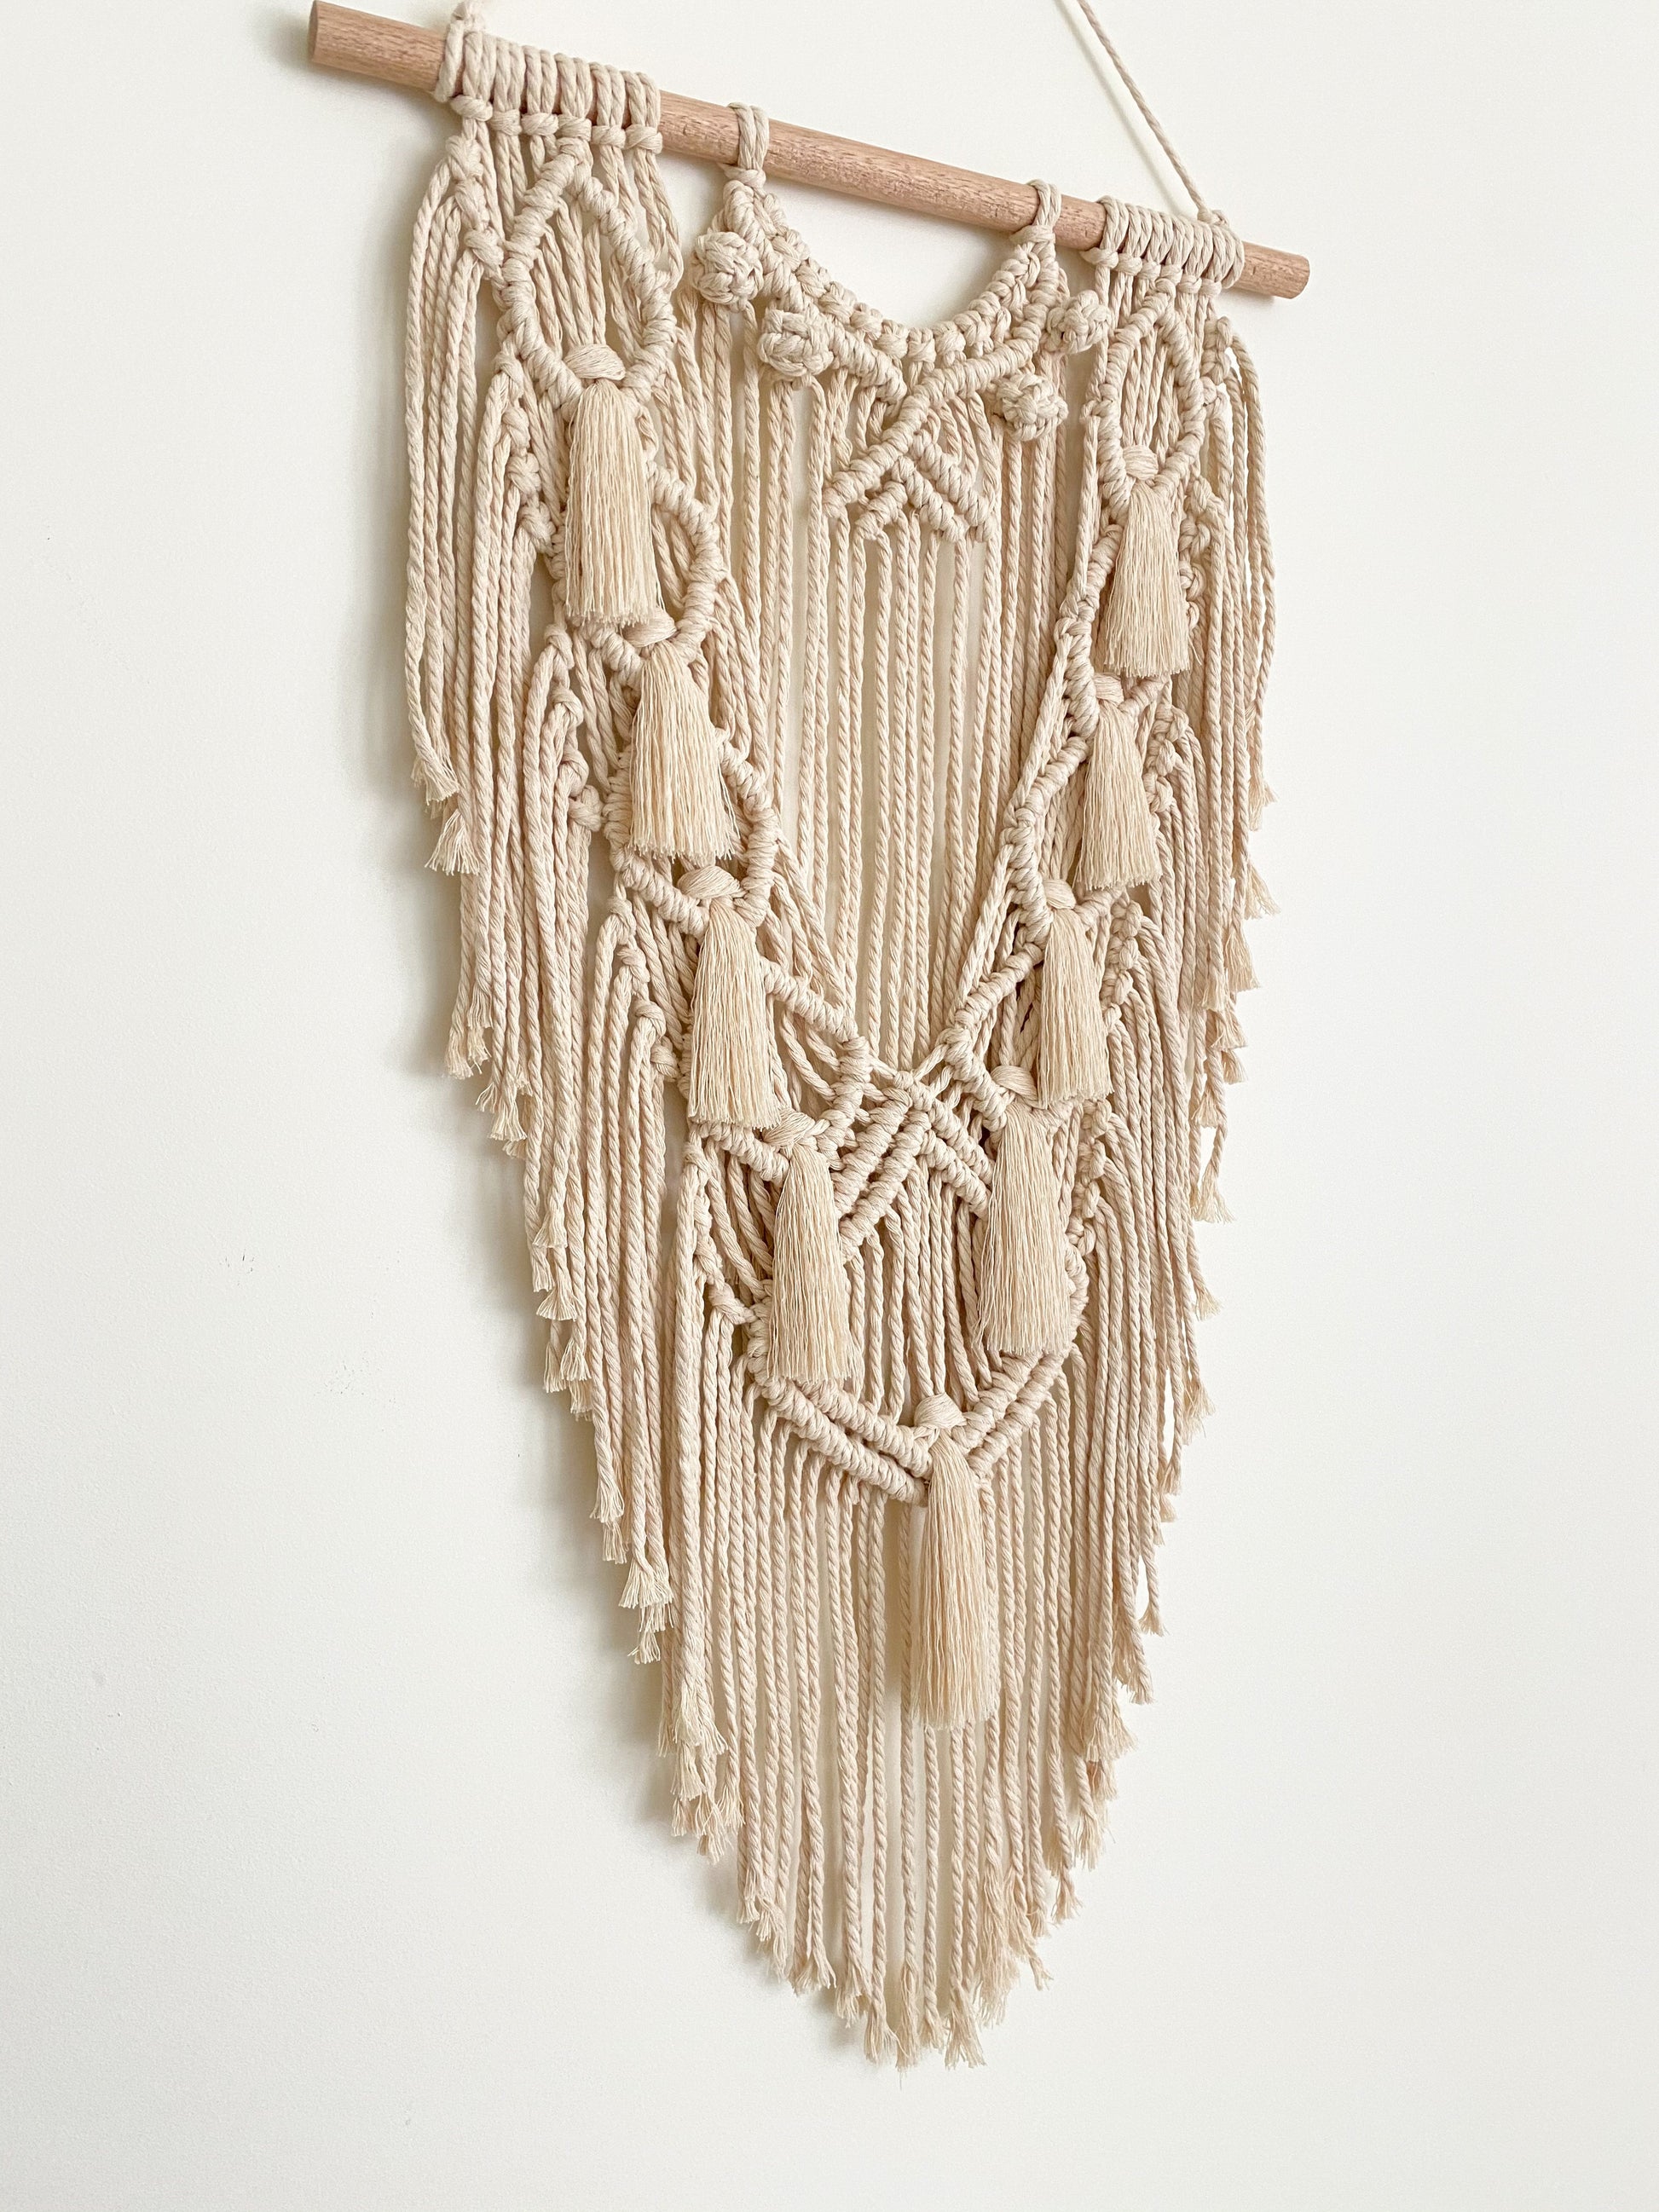 Side view of a natural white macrame wall hanging hanged on a white wall 